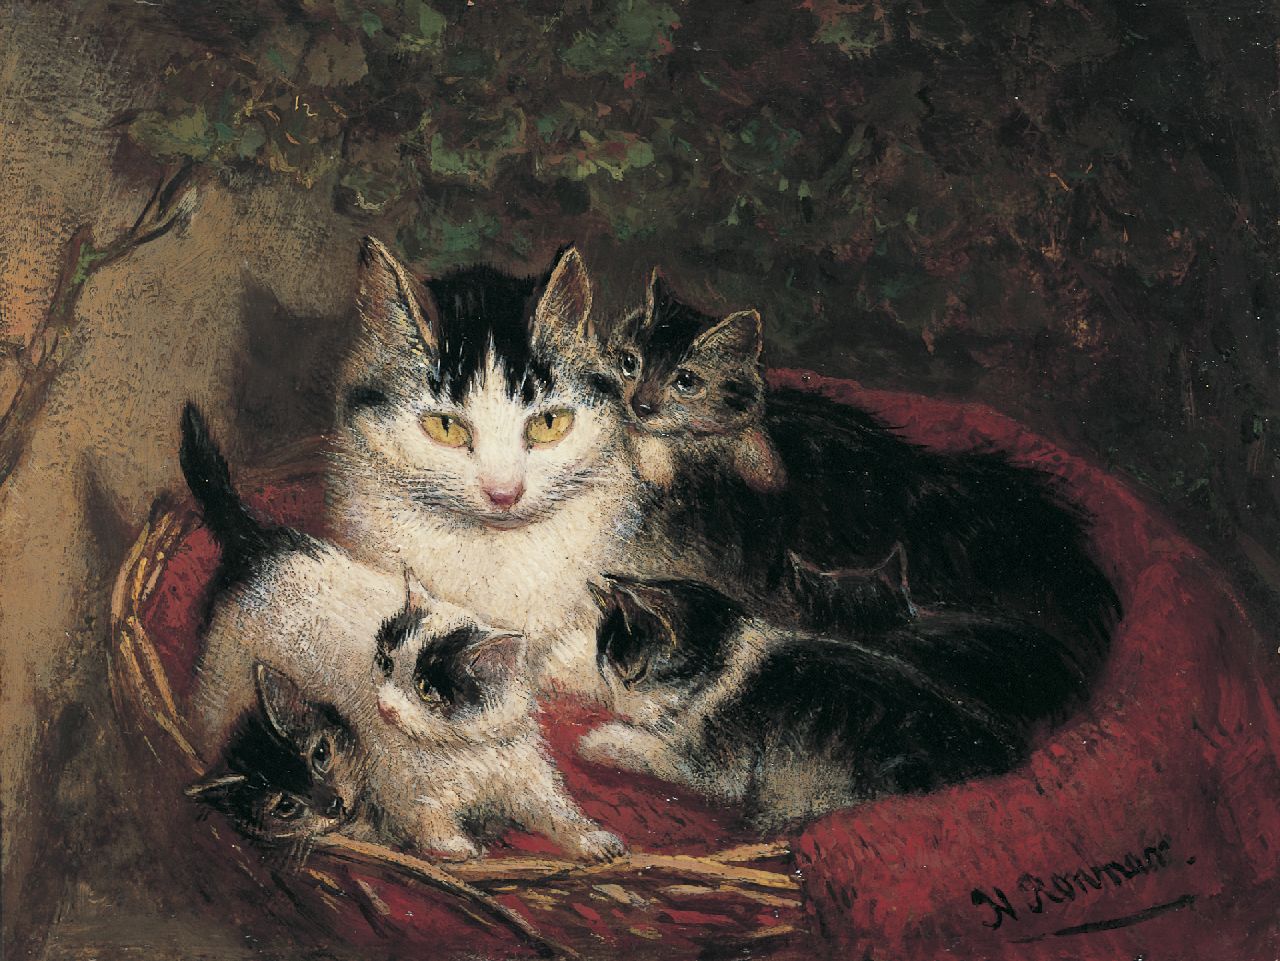 Ronner-Knip H.  | Henriette Ronner-Knip, The proud mother, oil on panel 10.9 x 14.1 cm, signed l.r.